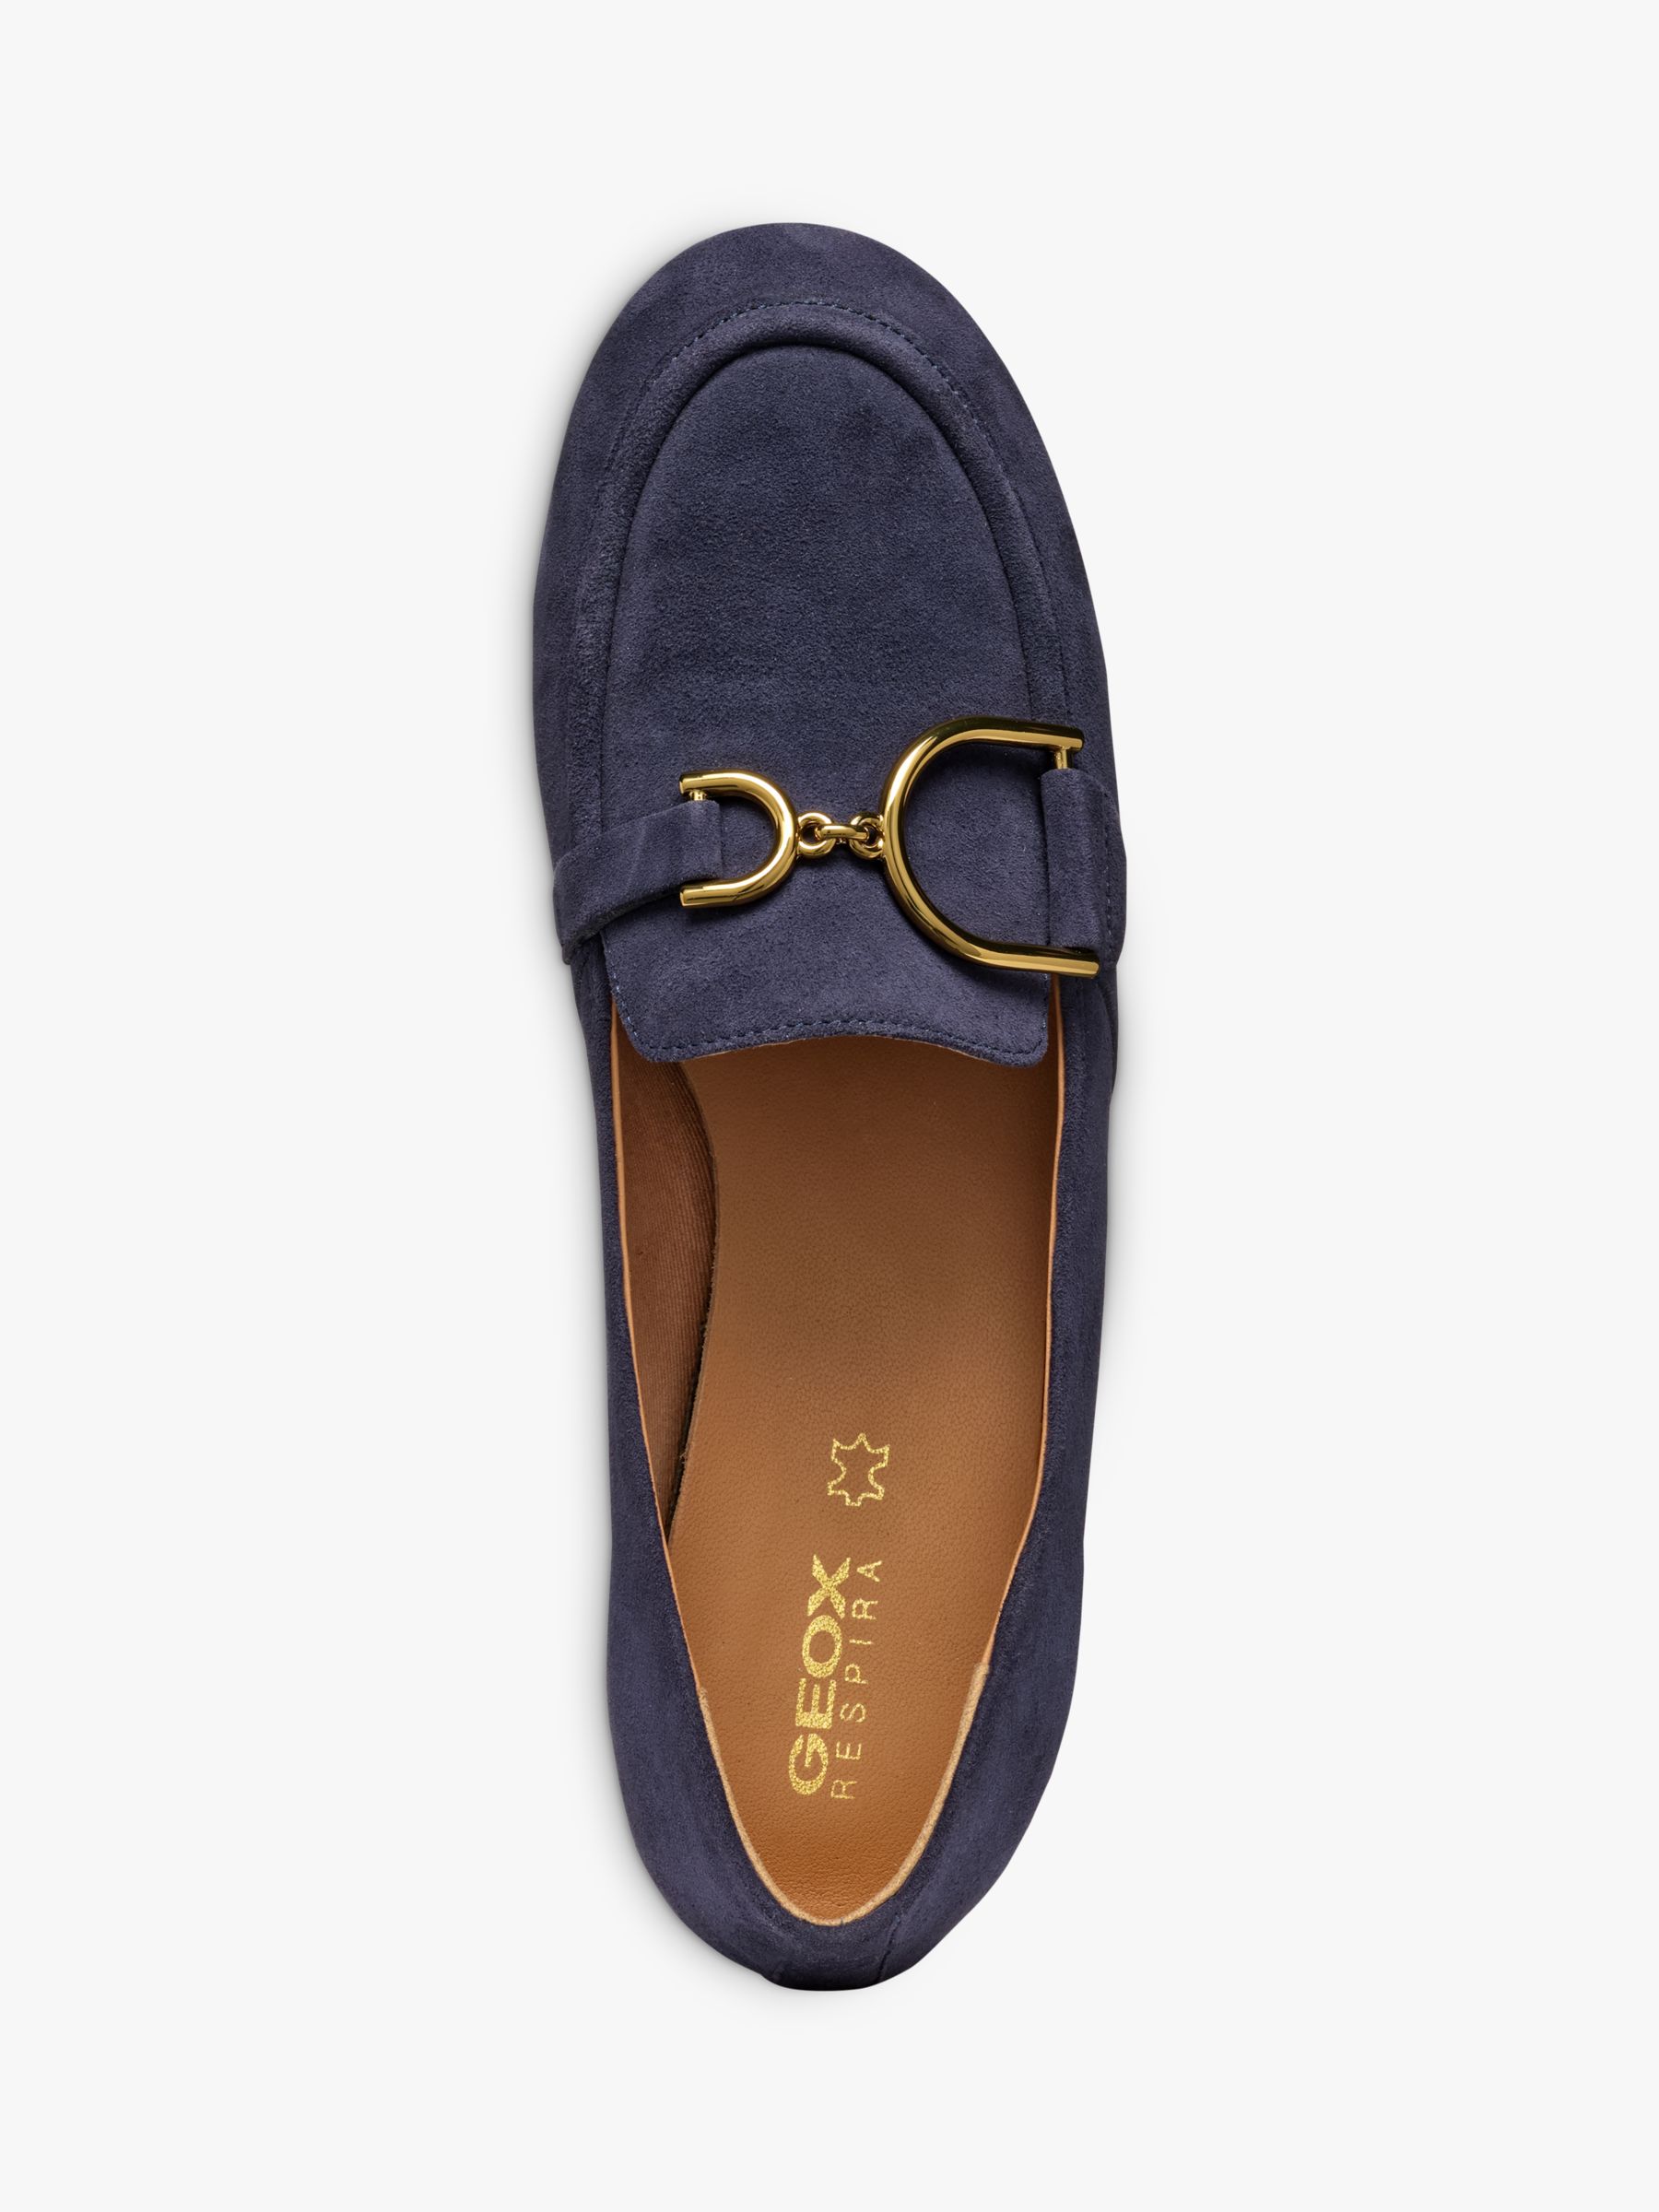 Buy Geox Palmaria Suede Loafers Online at johnlewis.com